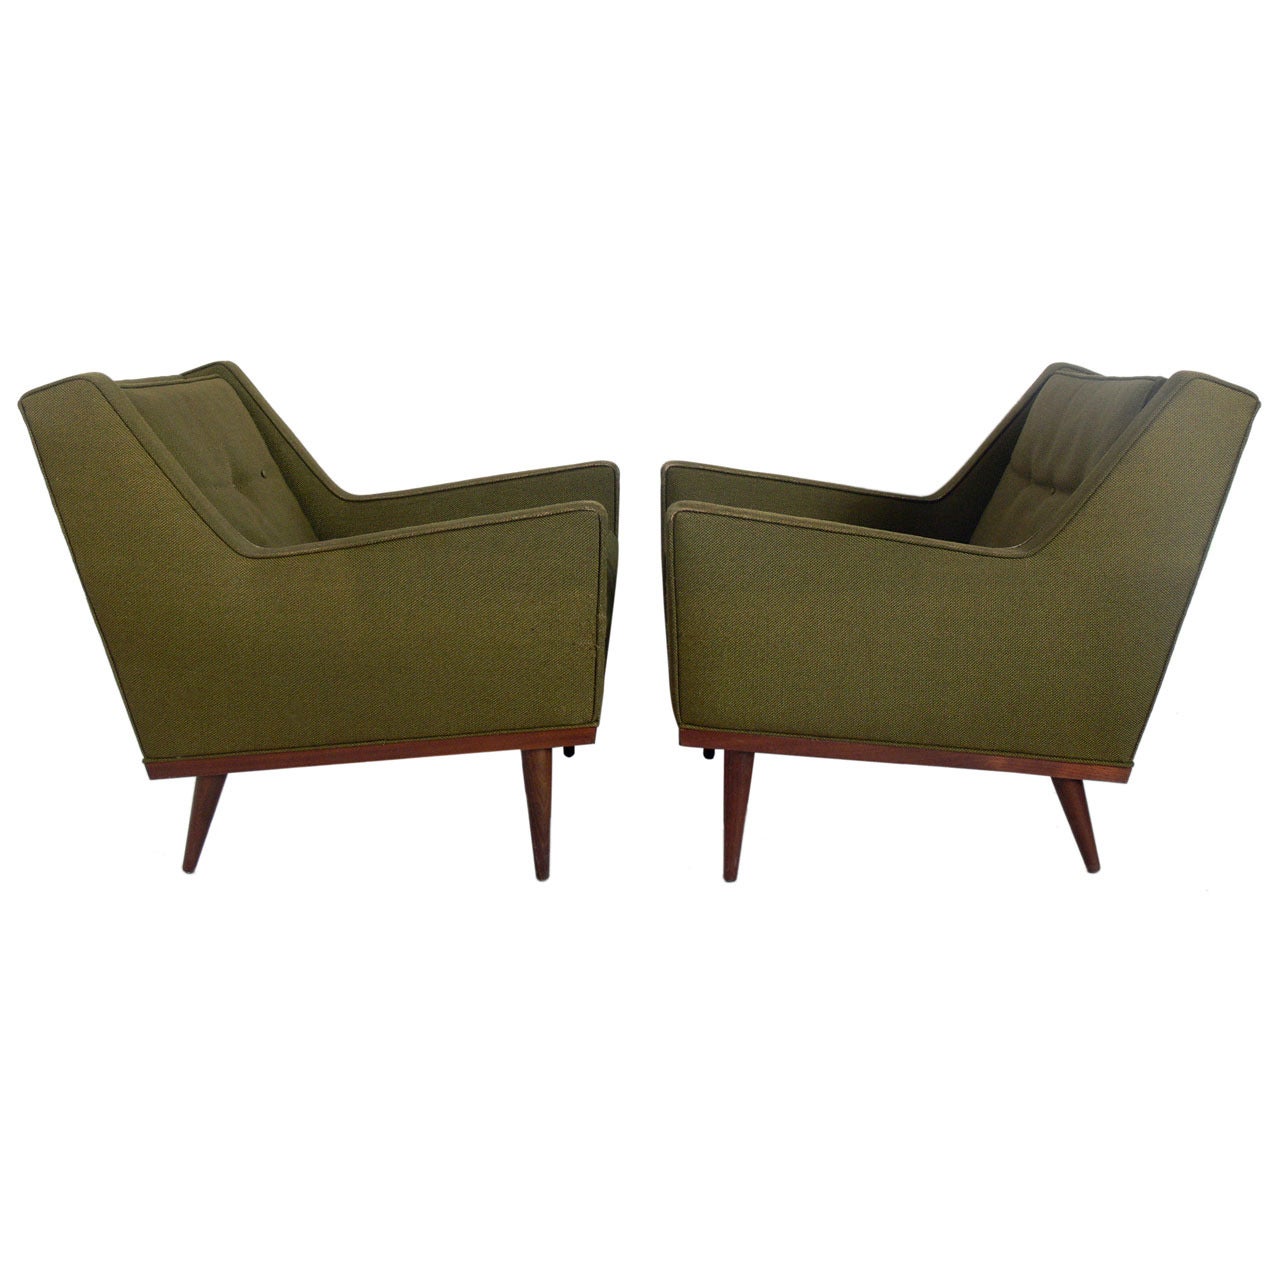 Pair of Modern Lounge Chairs by Milo Baughman